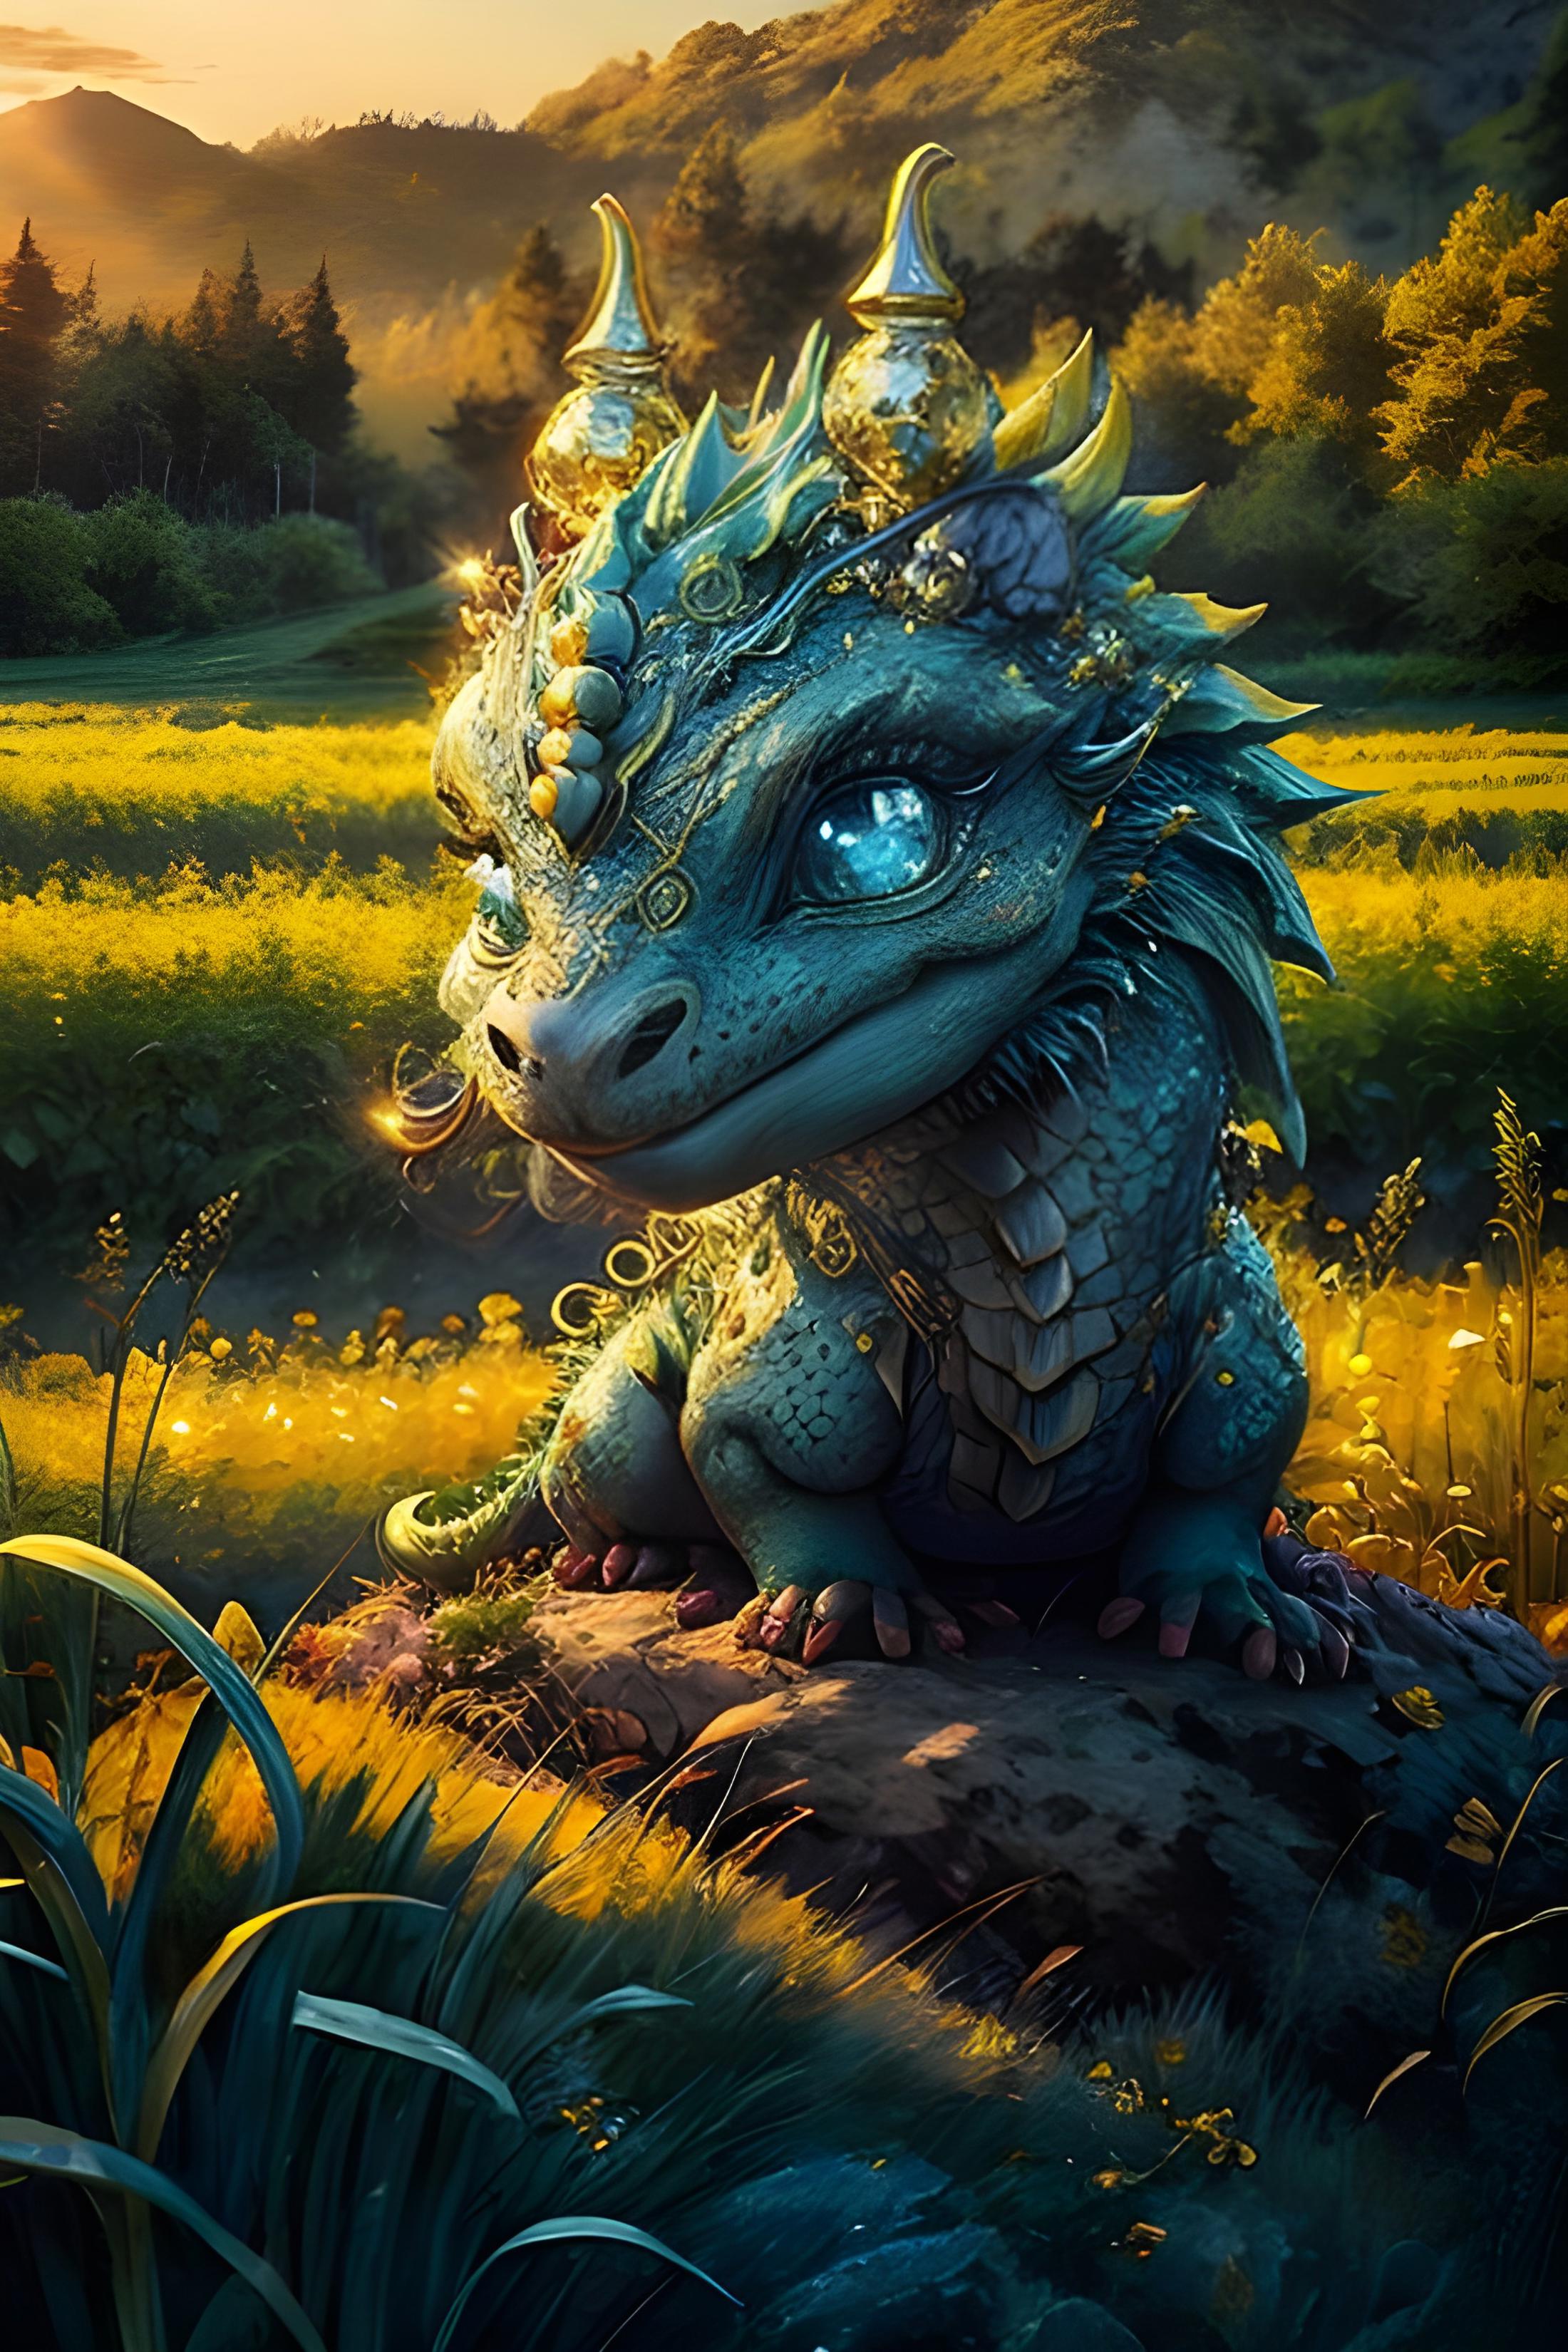 Western Fantasy Dragons image by AntUnderboot